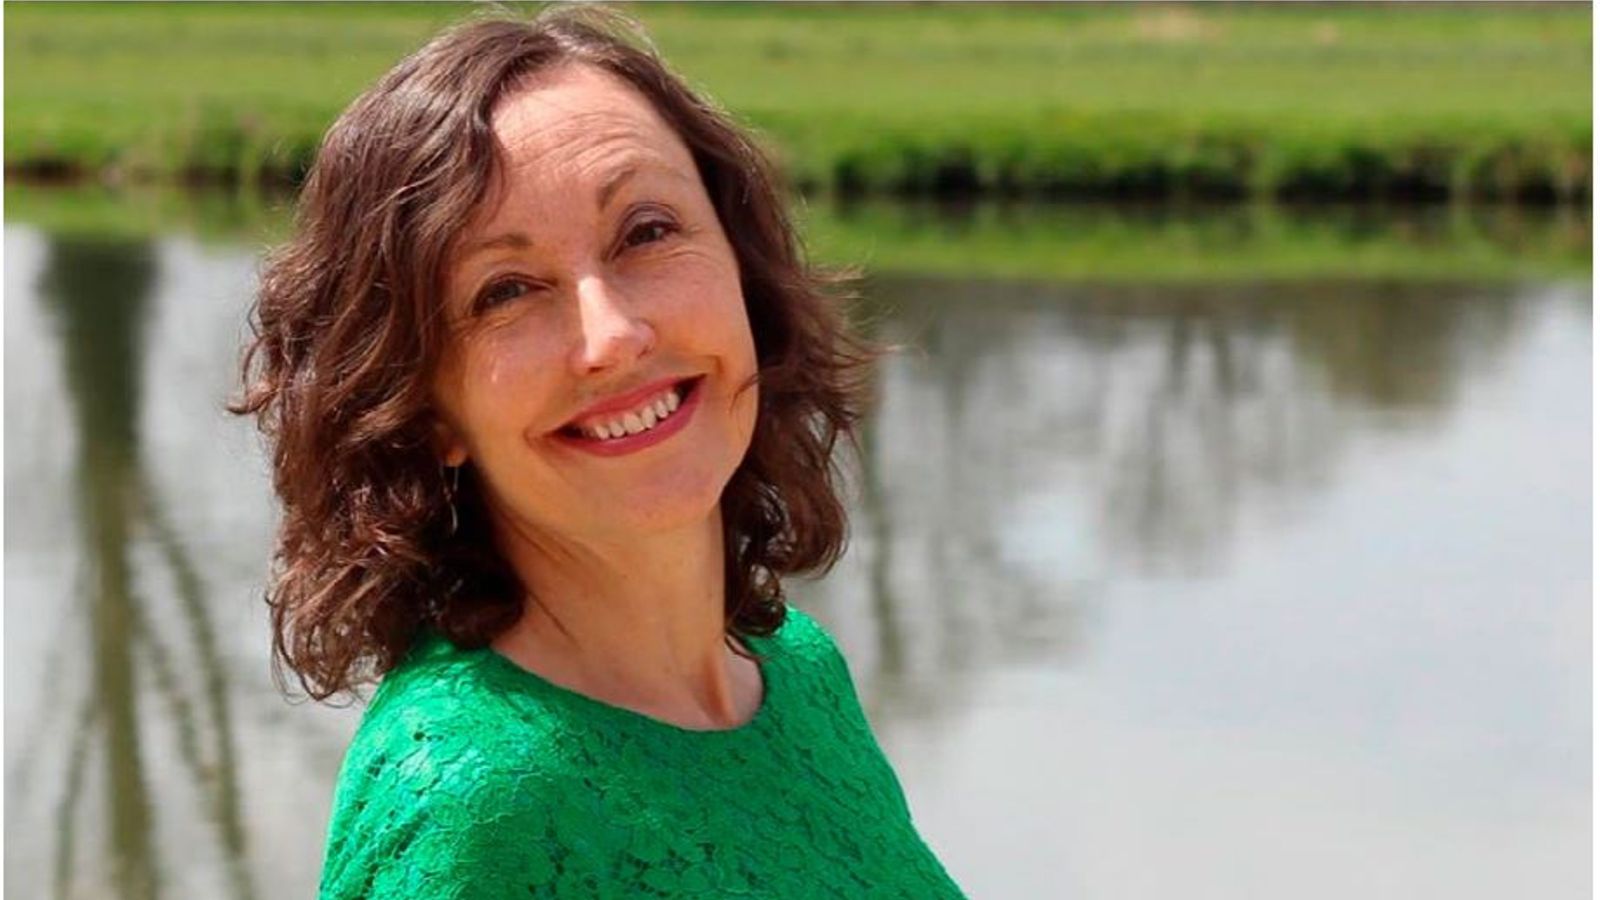 Professor Aileen Kavanagh wears a green blouse and stands in front of a lake